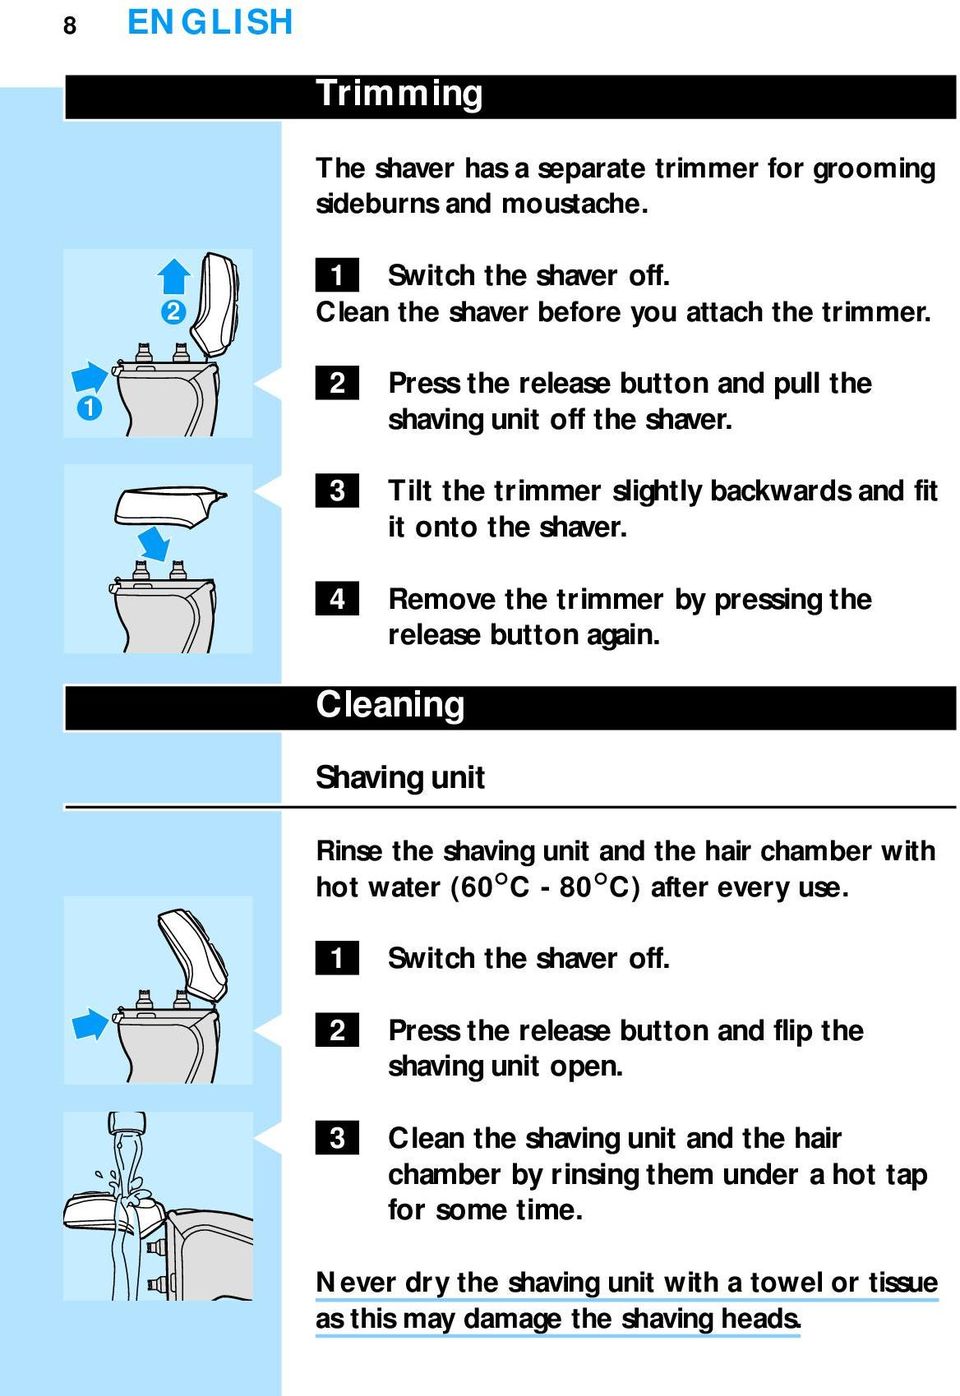 4 Remove the trimmer by pressing the release button again. Cleaning Shaving unit Rinse the shaving unit and the hair chamber with hot water (60cC - 80cC) after every use.